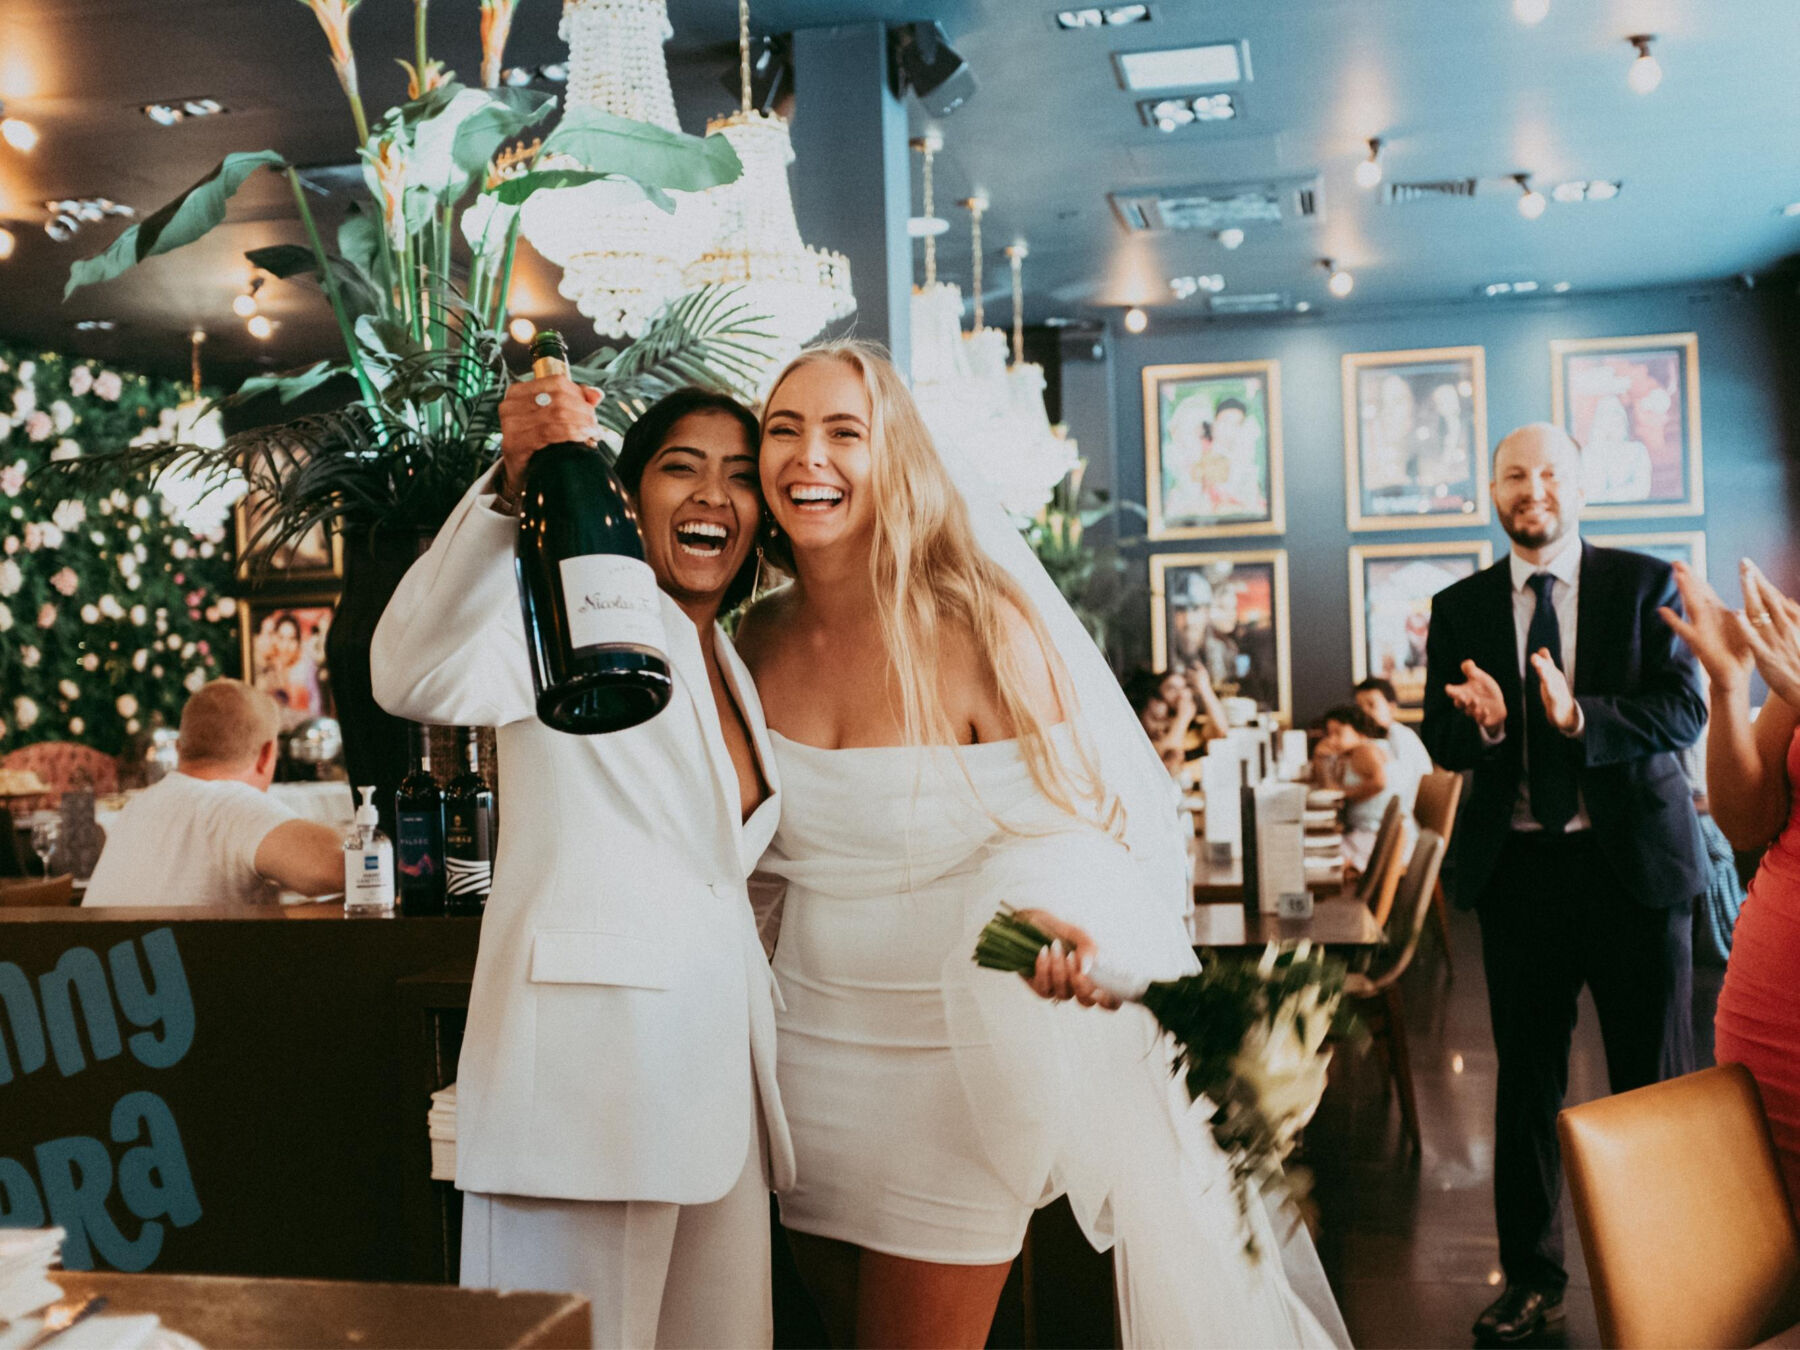 Lesbian brides at their same sex wedding with a bottle of champagne. Daniel Mice Photography.